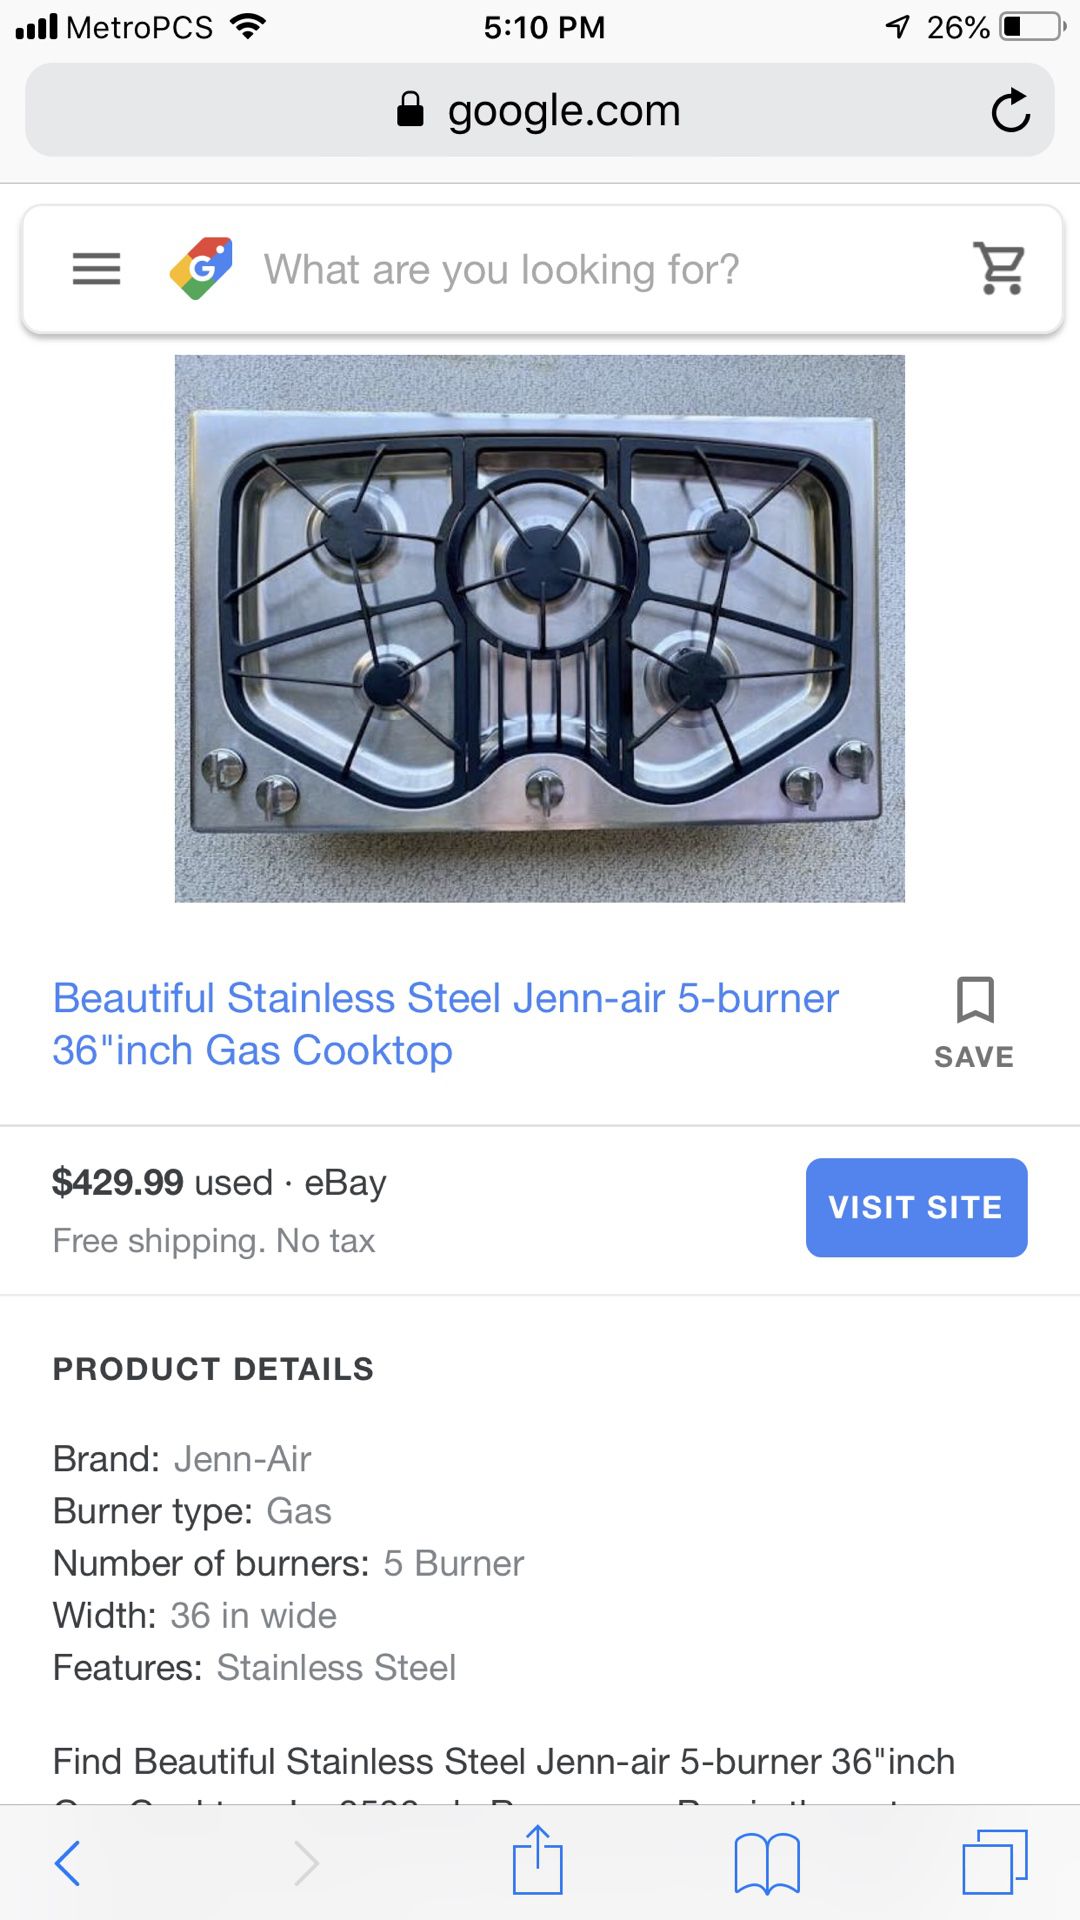 Jen-air stainless steel 36” gas cooktop.